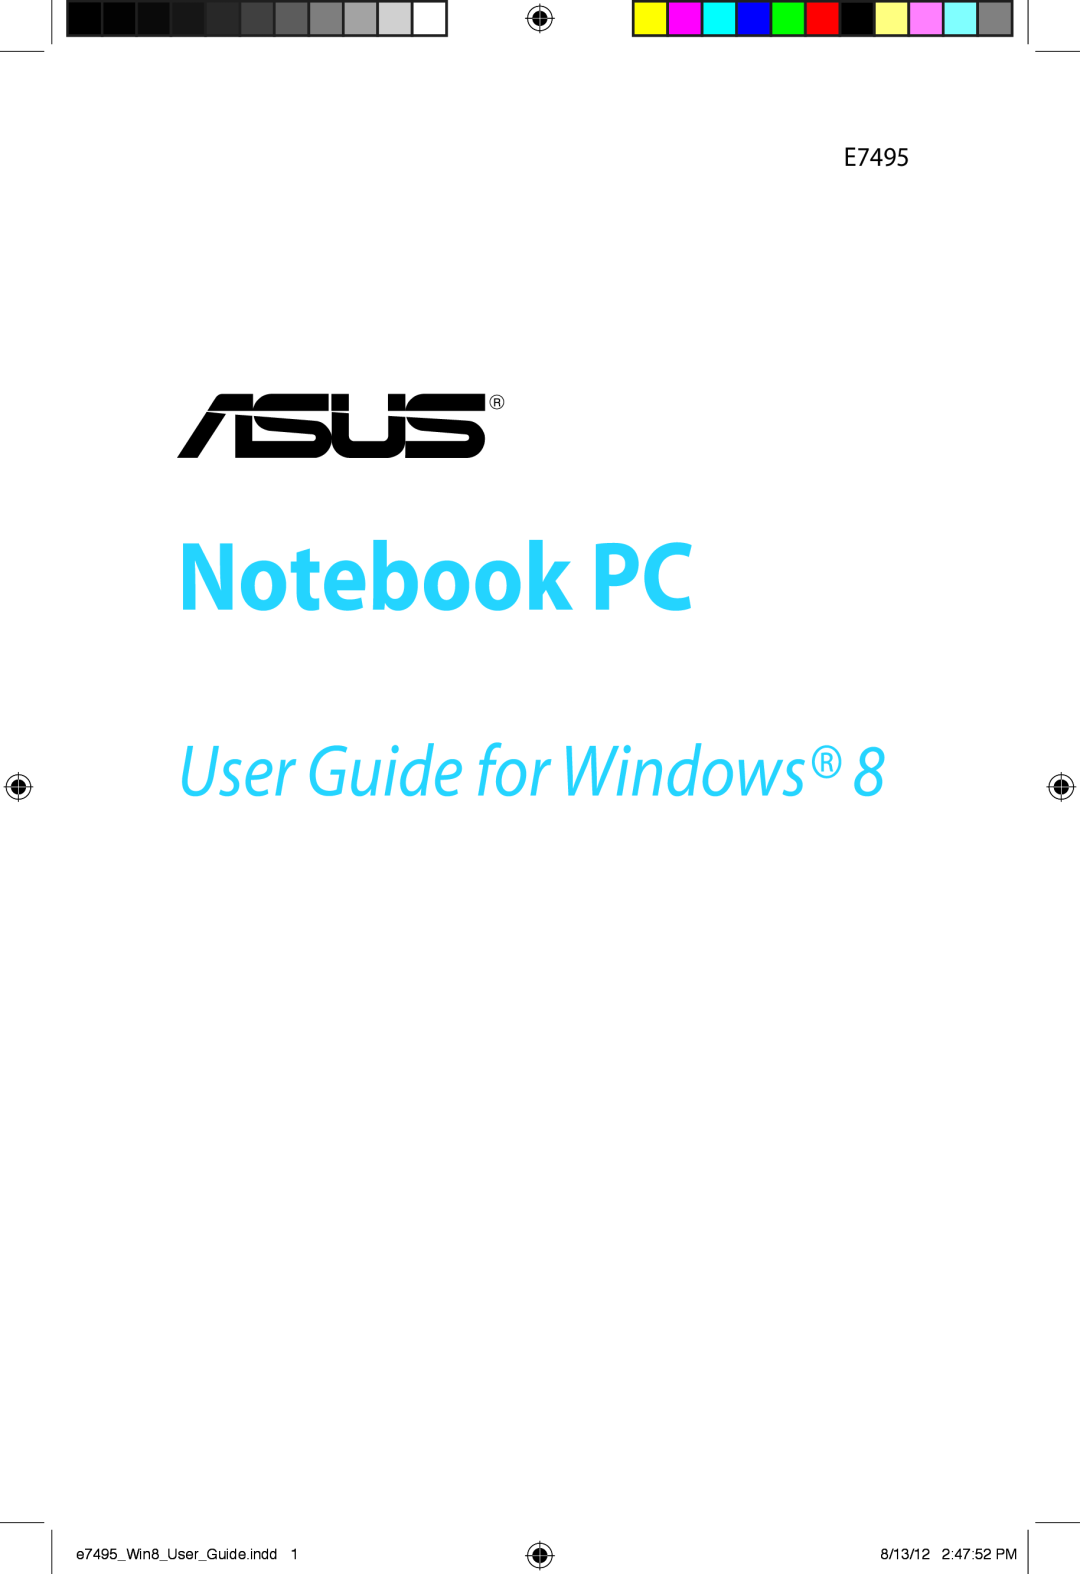 Asus K55A-DS51, K55A-DH71, R500NRH81 manual Notebook PC, User Guide for Windows, e7495Win8UserGuide.indd, 8/13/12 24752 PM 